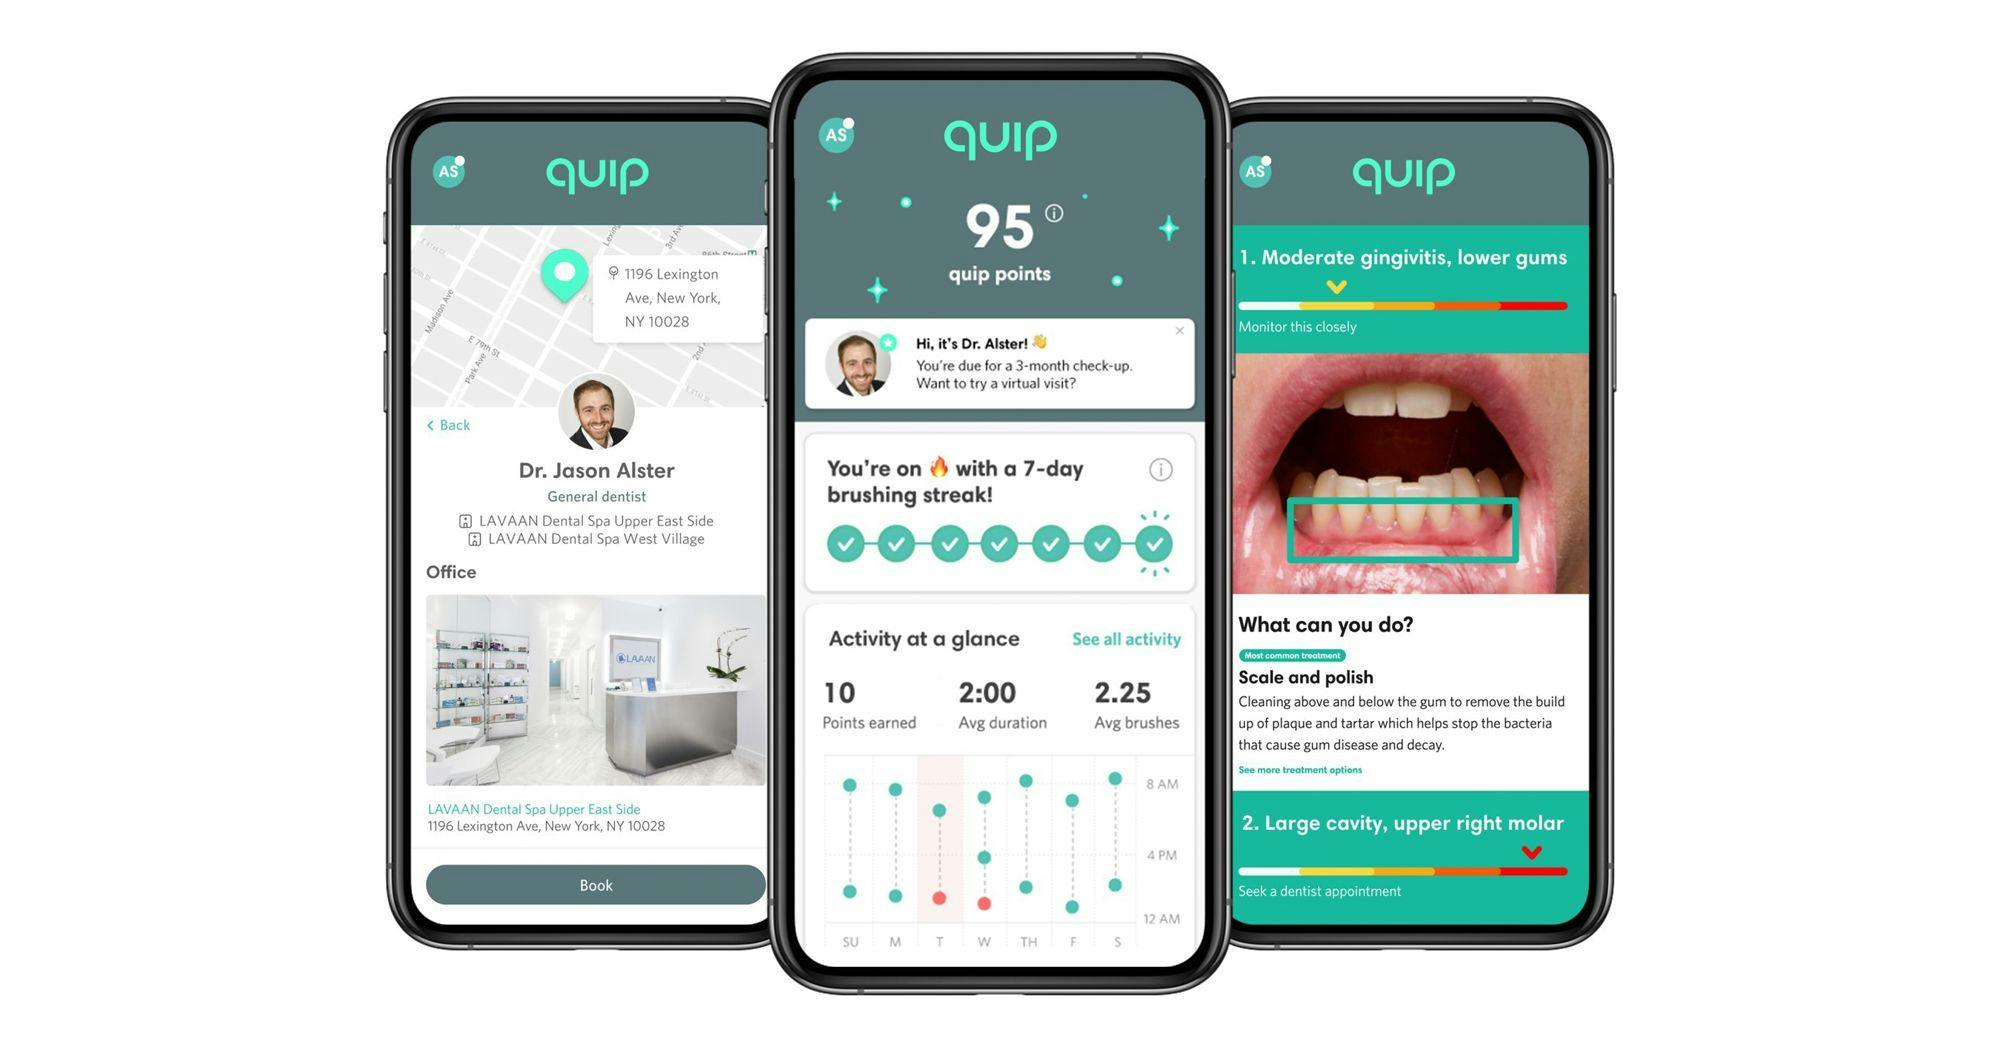 Quip Acquires Teledentistry Company Toothpic